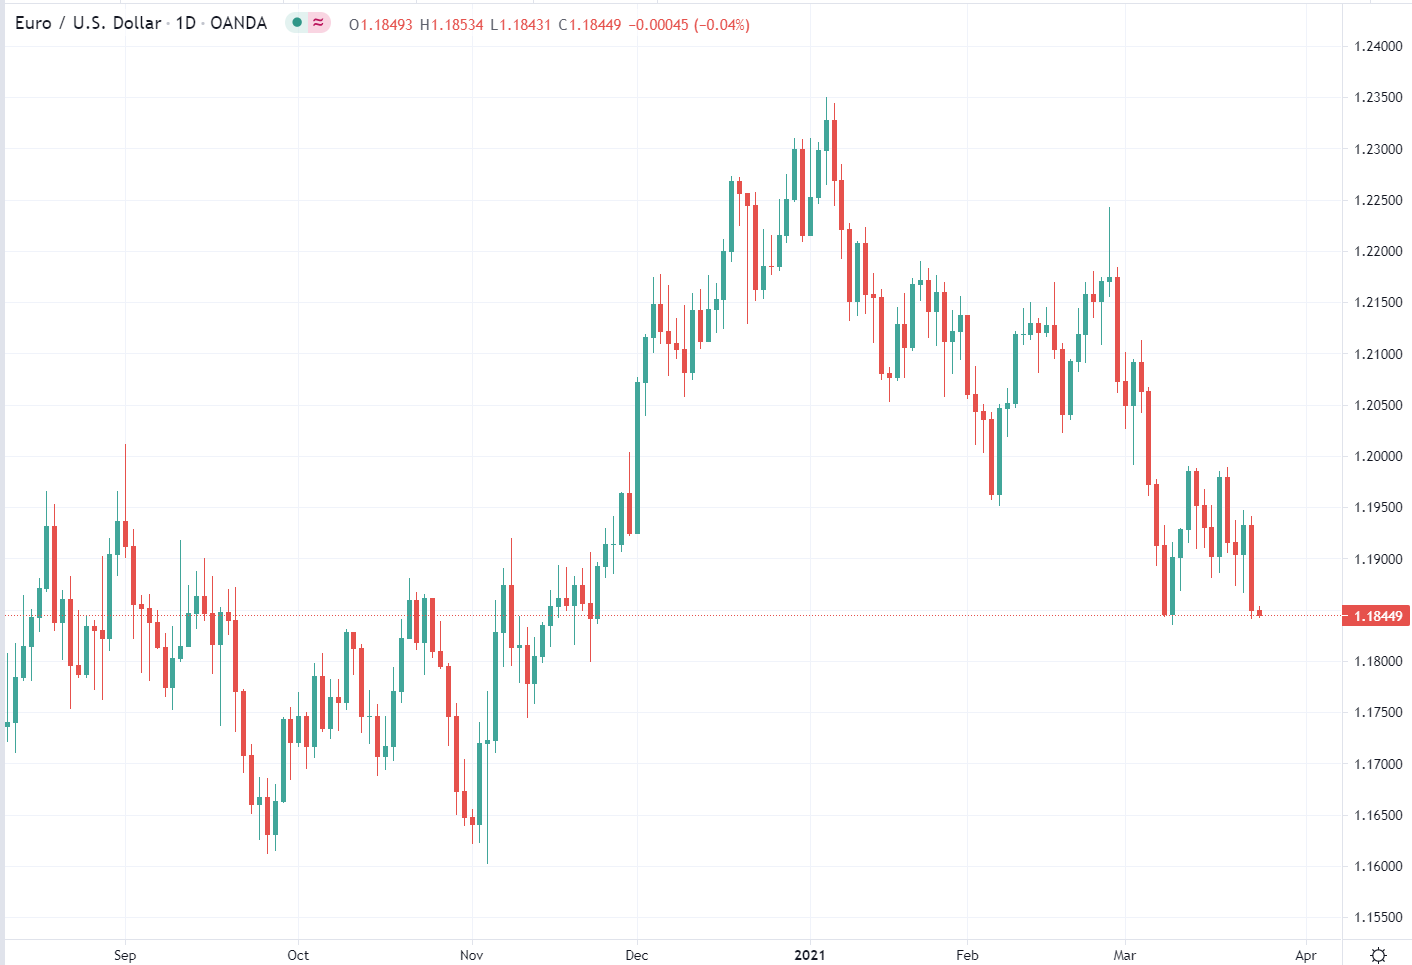 EUR/USD at risk of a further decline, levels to watch for a breakdown